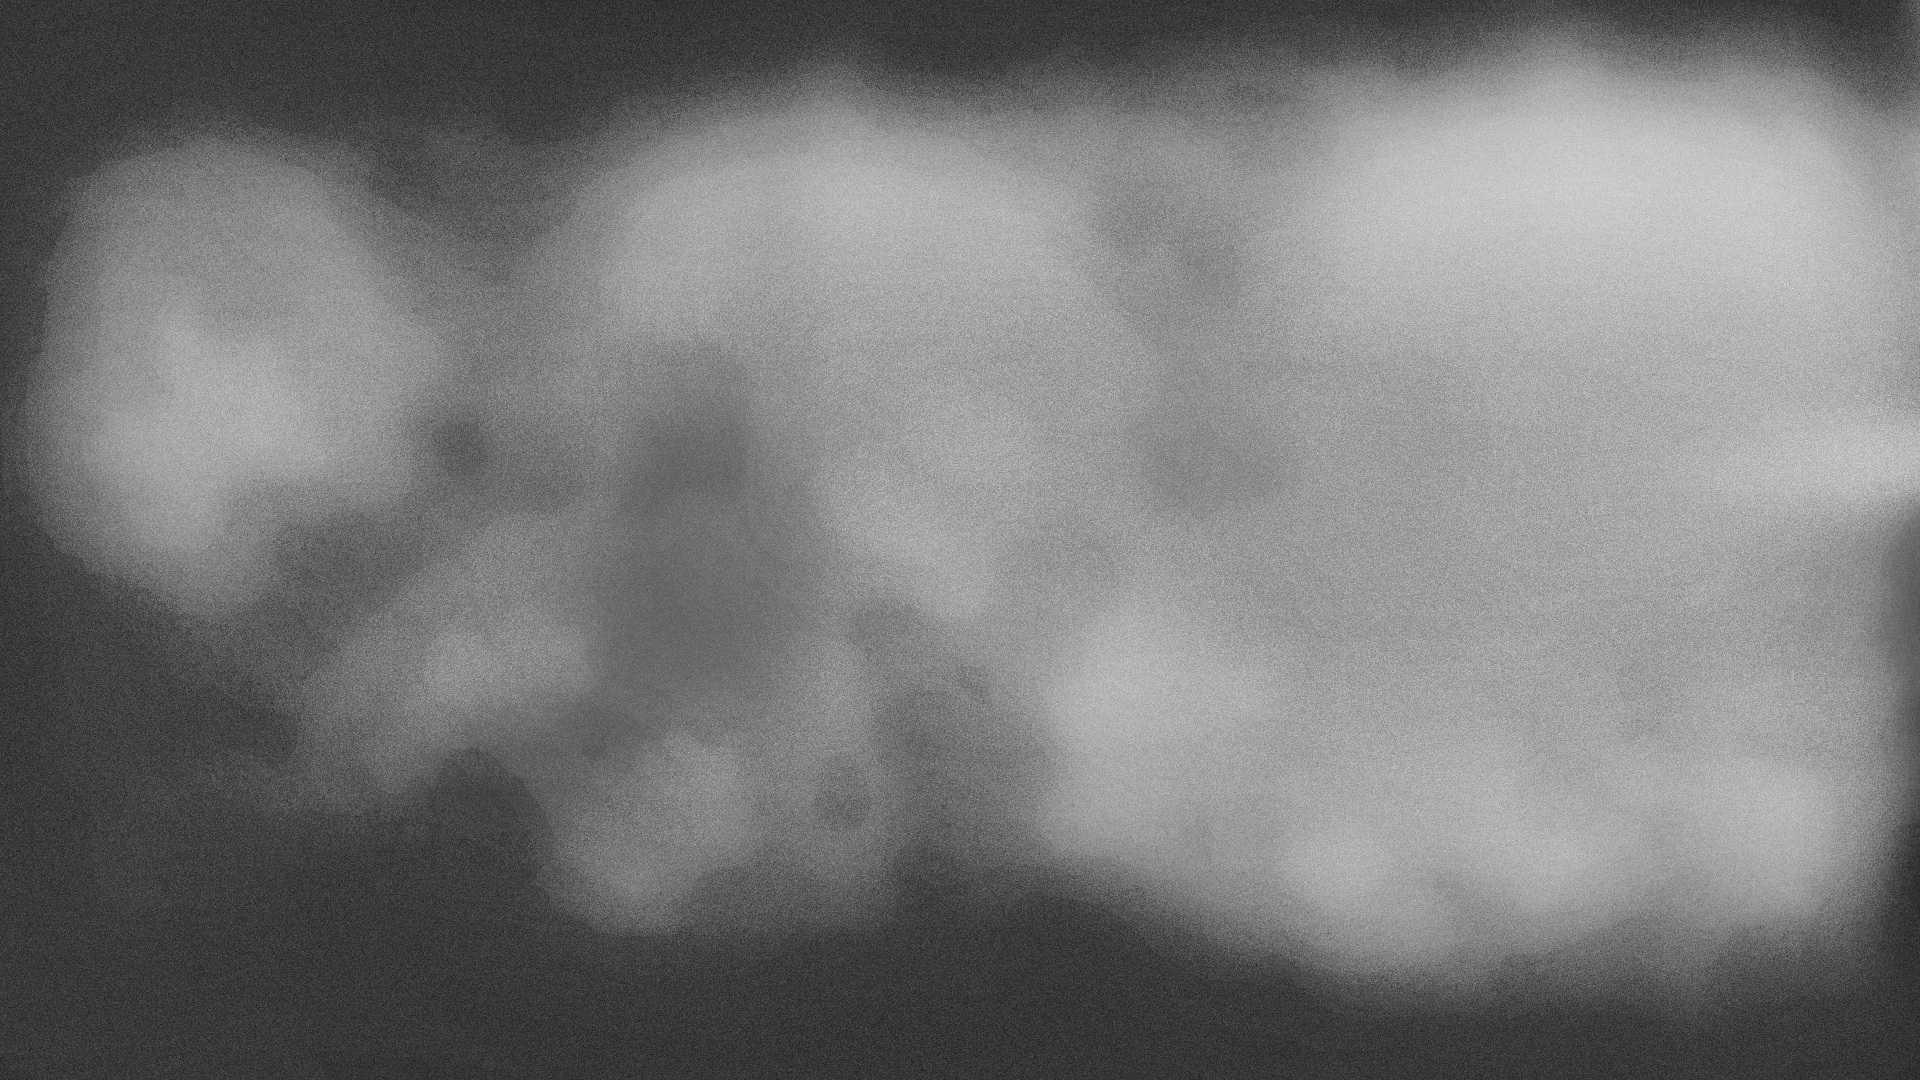 General 1920x1080 abstract clouds minimalism monochrome digital art sky gray overcast